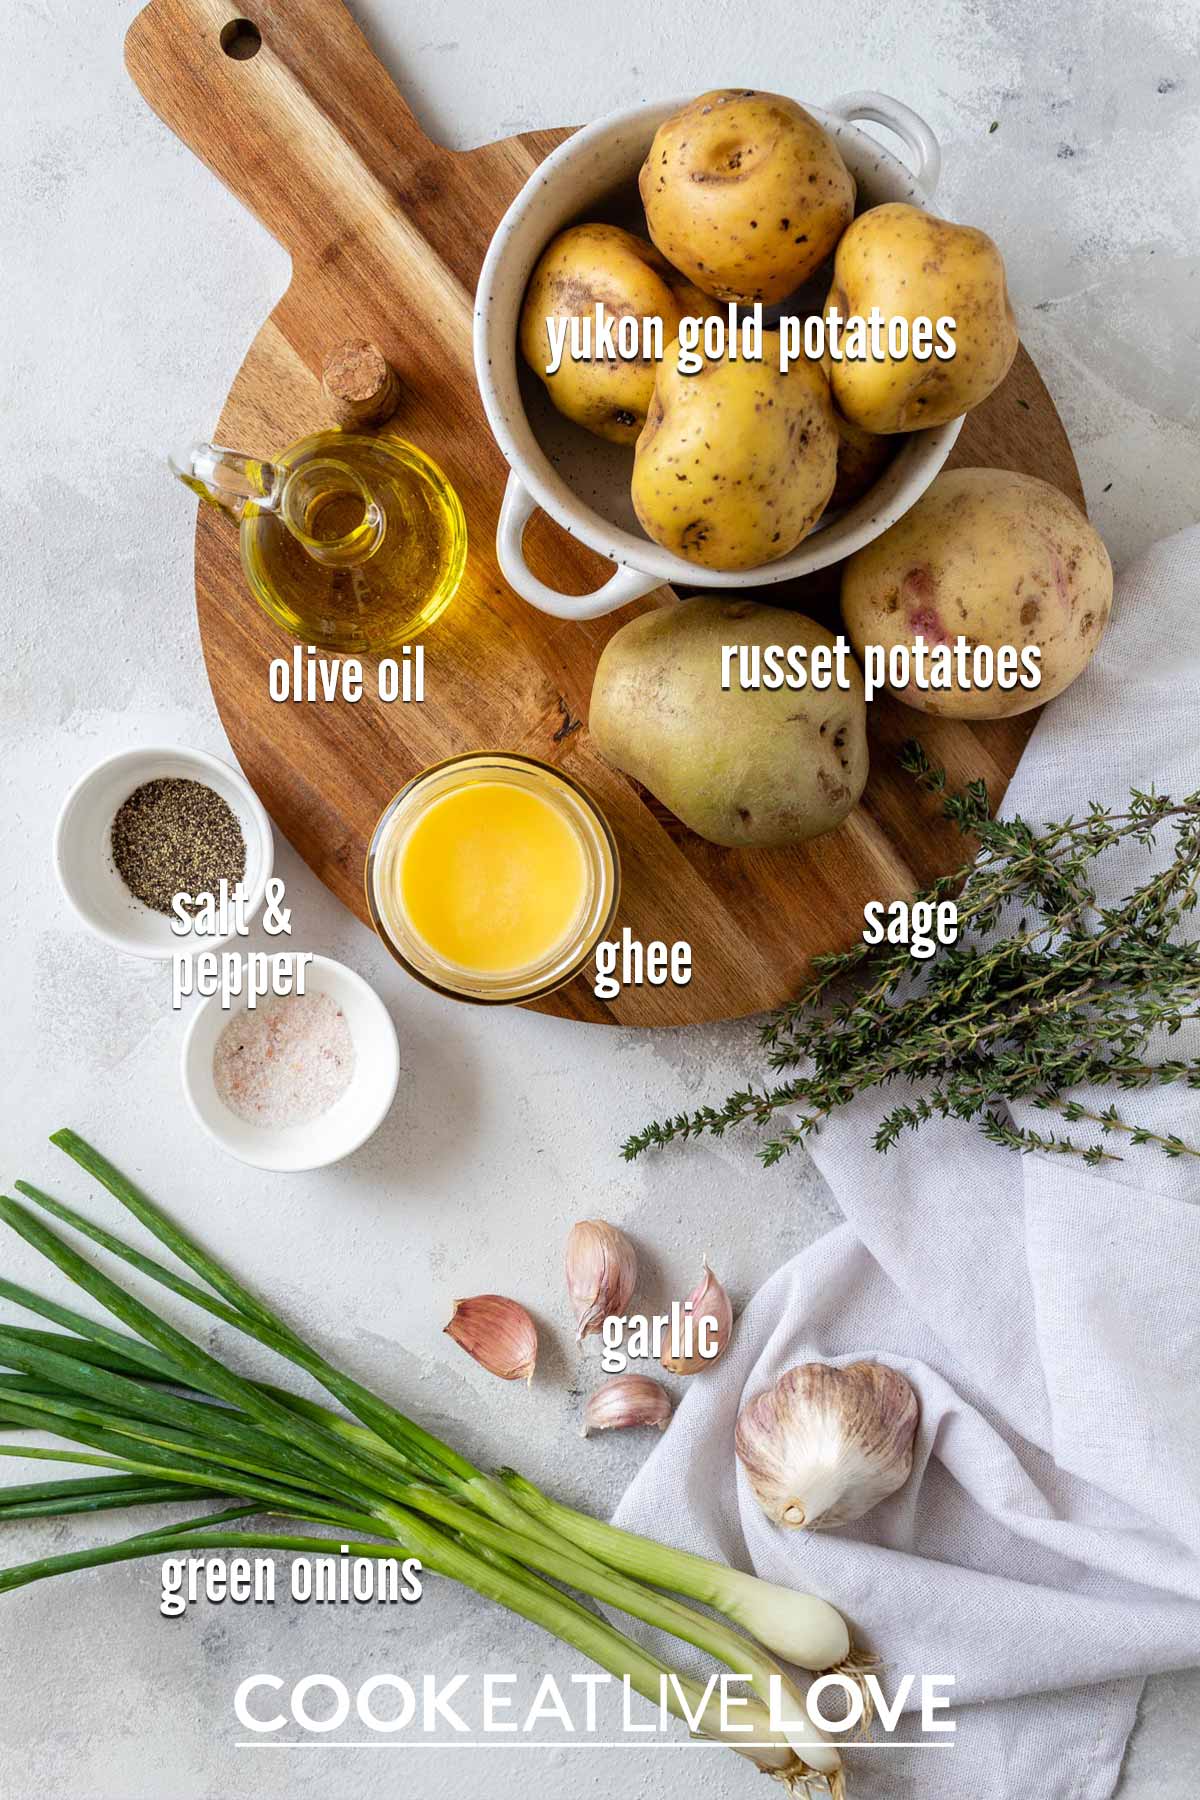 Ingredients you need to make a potato galette.